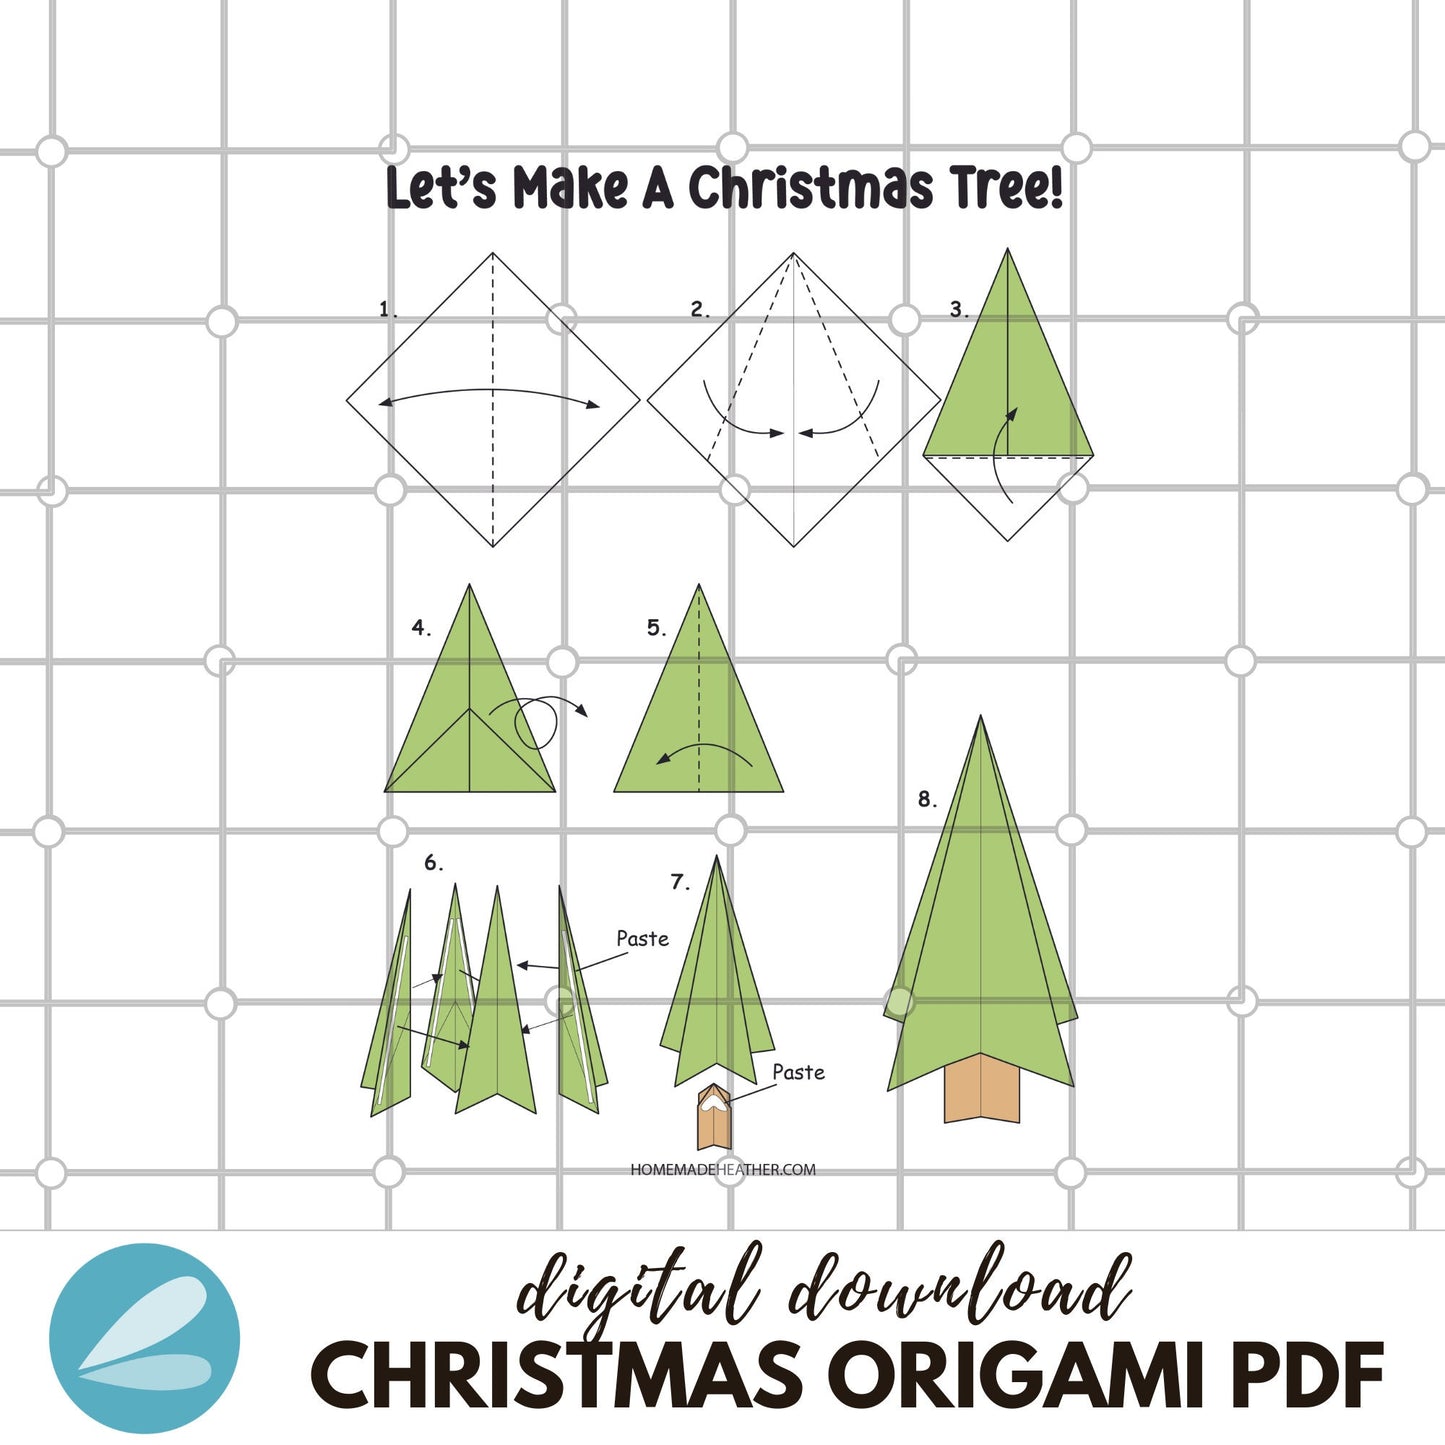 Origami Christmas Printable Pages - Christmas Origami PDF - Instant Download